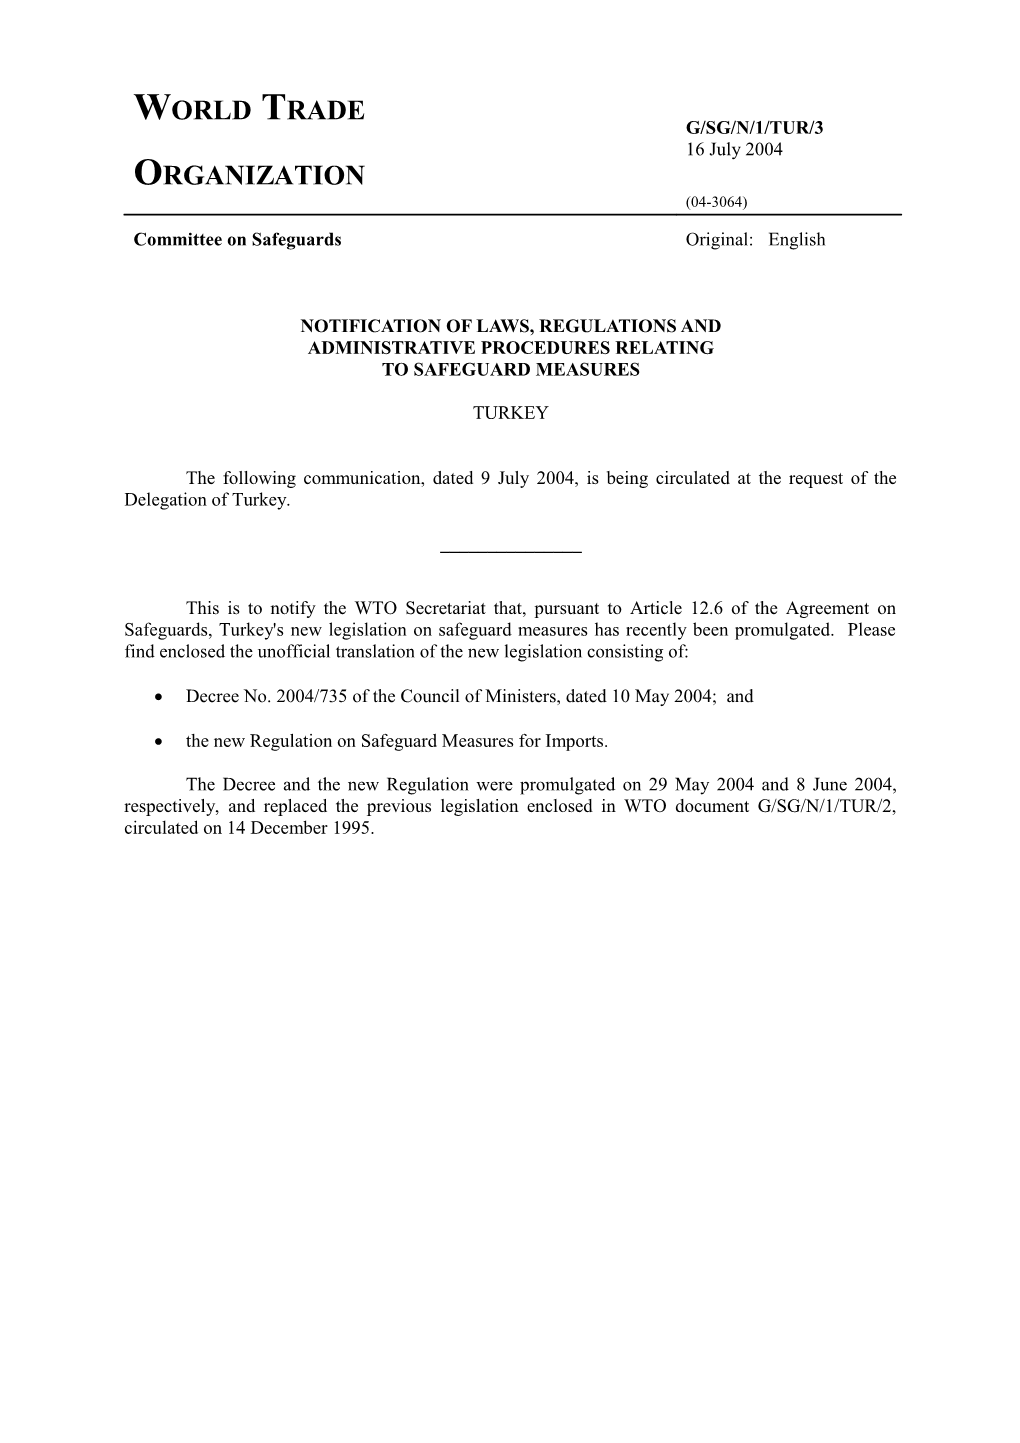 Notification of Laws, Regulations And